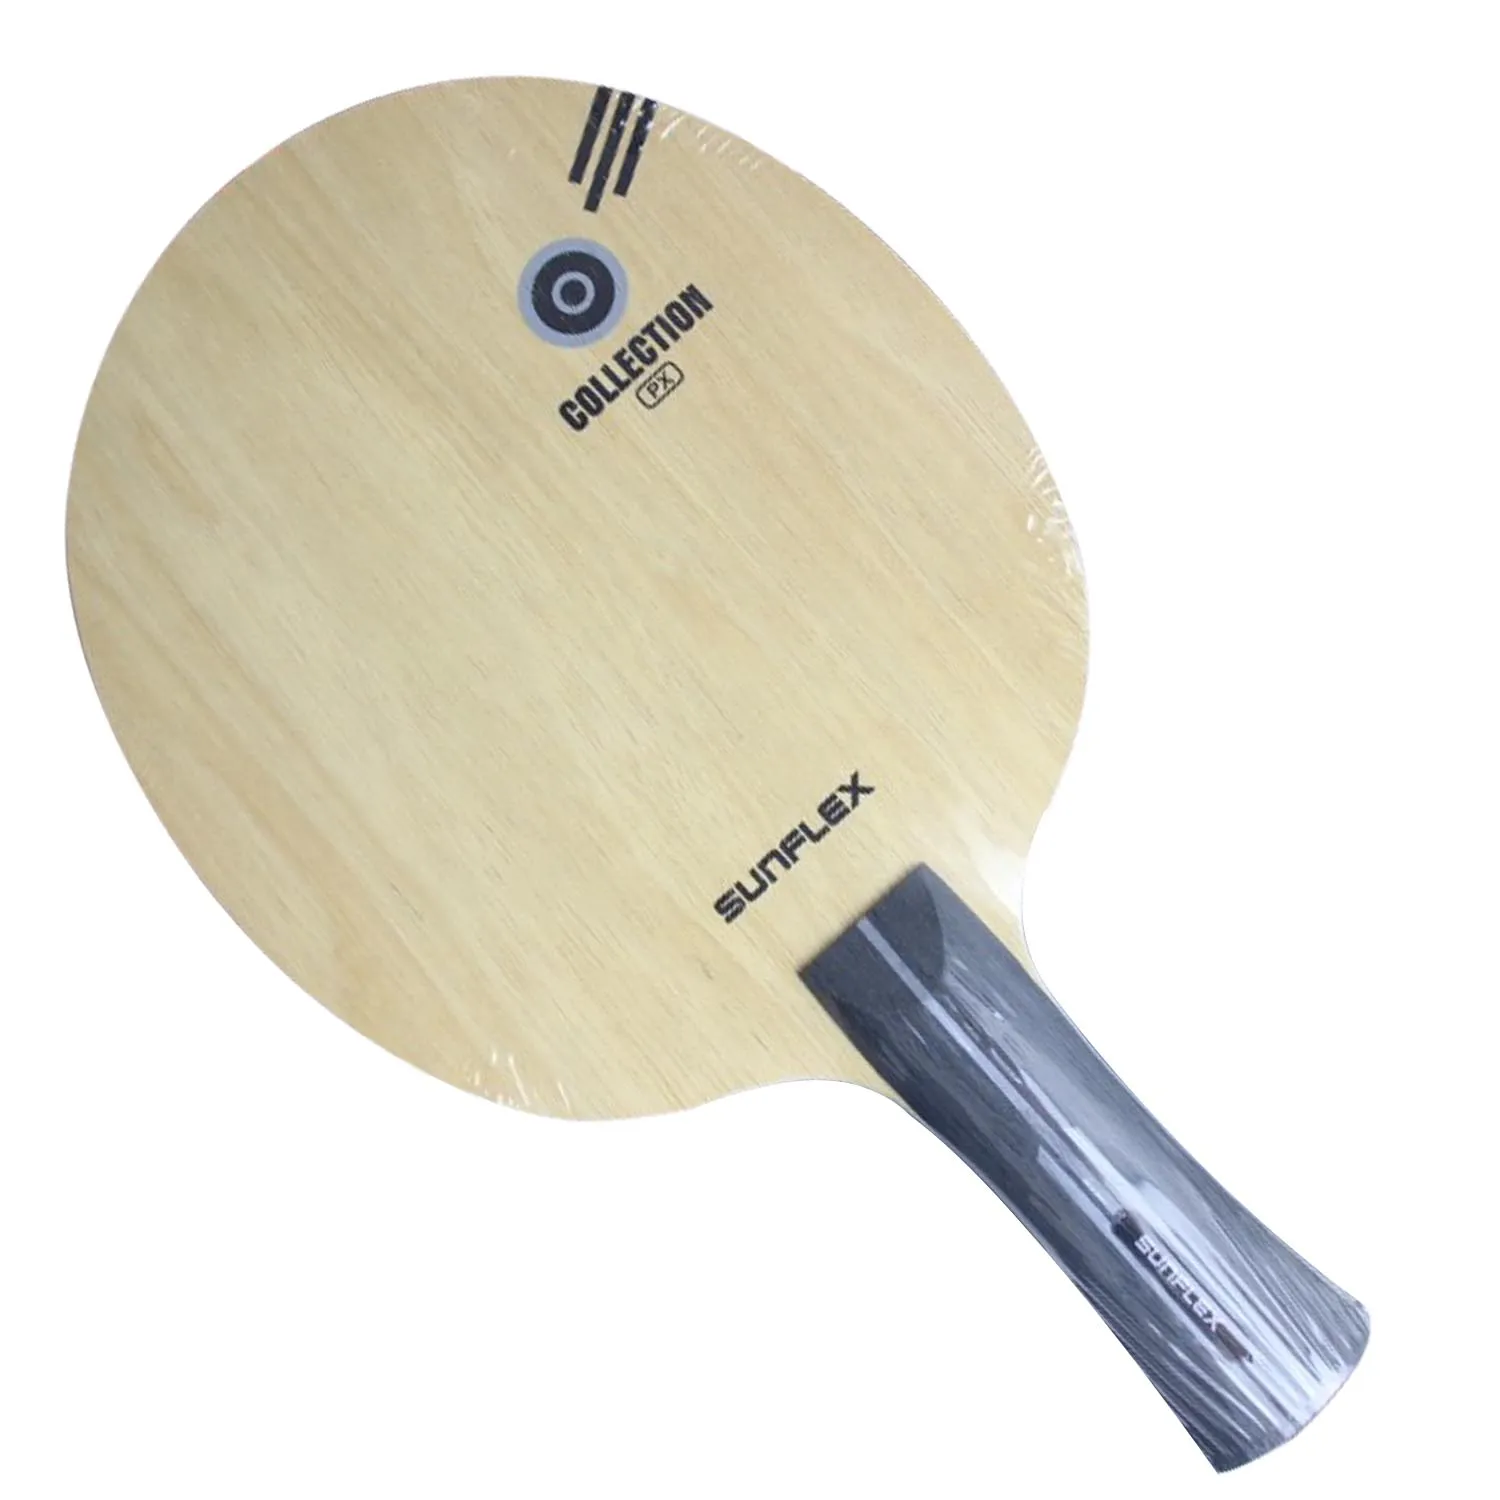 SUNFLEX COLLECTION 2 PX Table Tennis Racket 7 ply wood PingPong blade